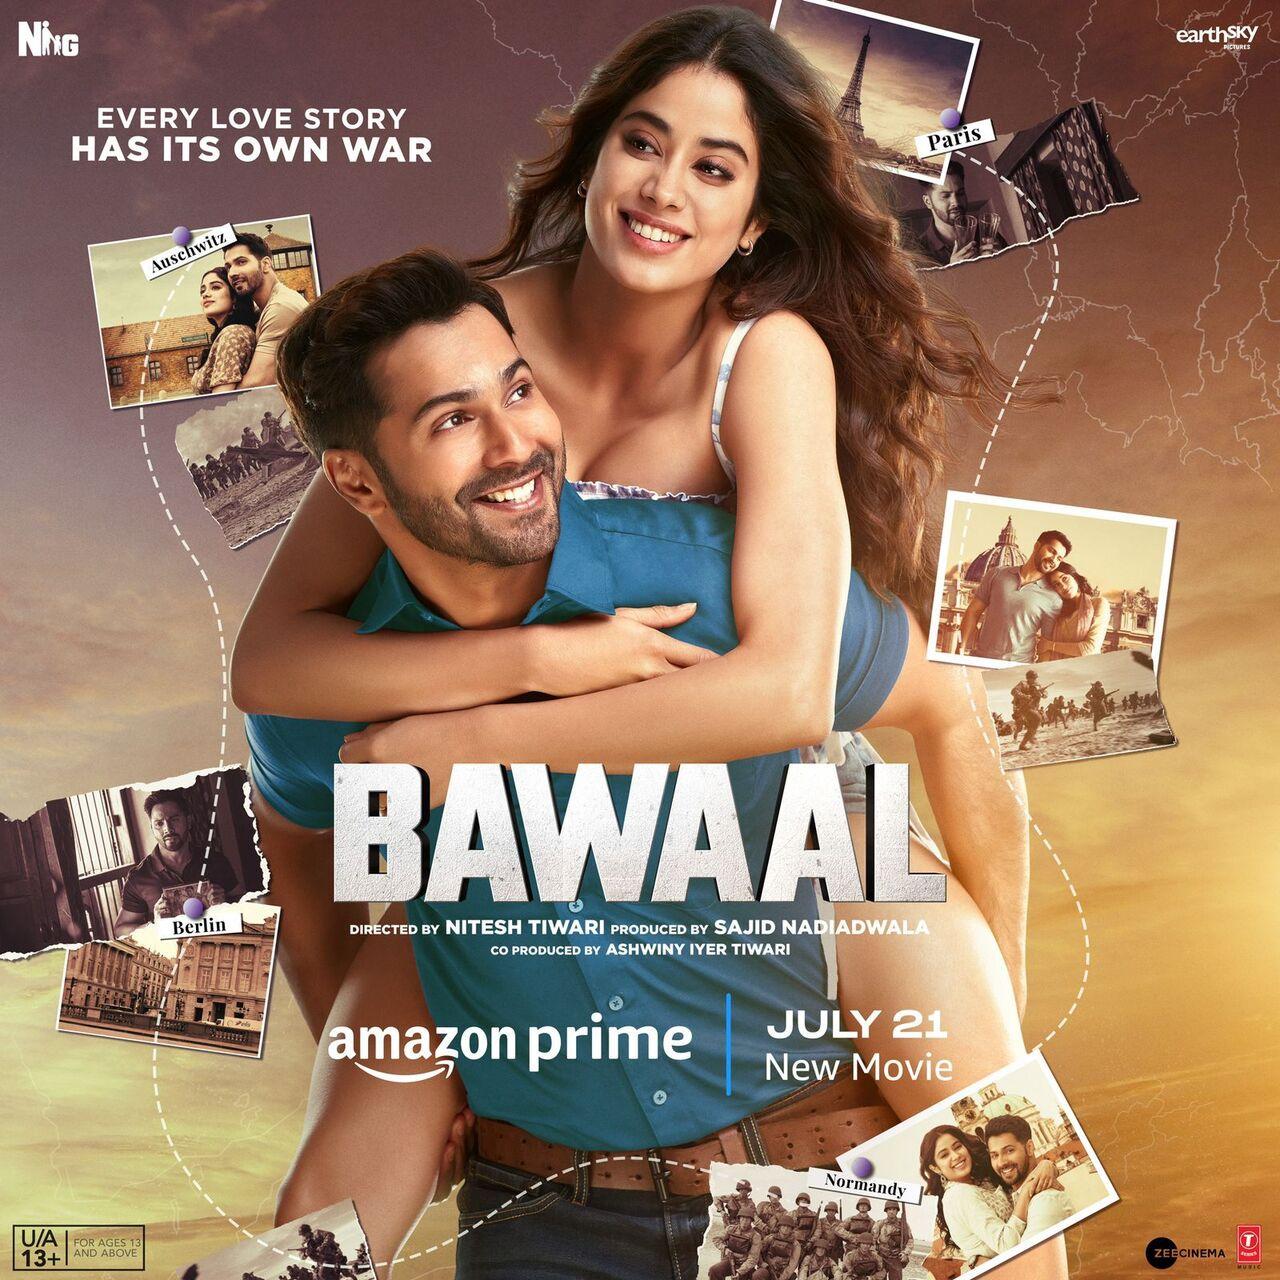 Varun Dhawan's Bawaal is the story of Ajay Dixit, a macho guy living in Lucknow and working as a high school teacher